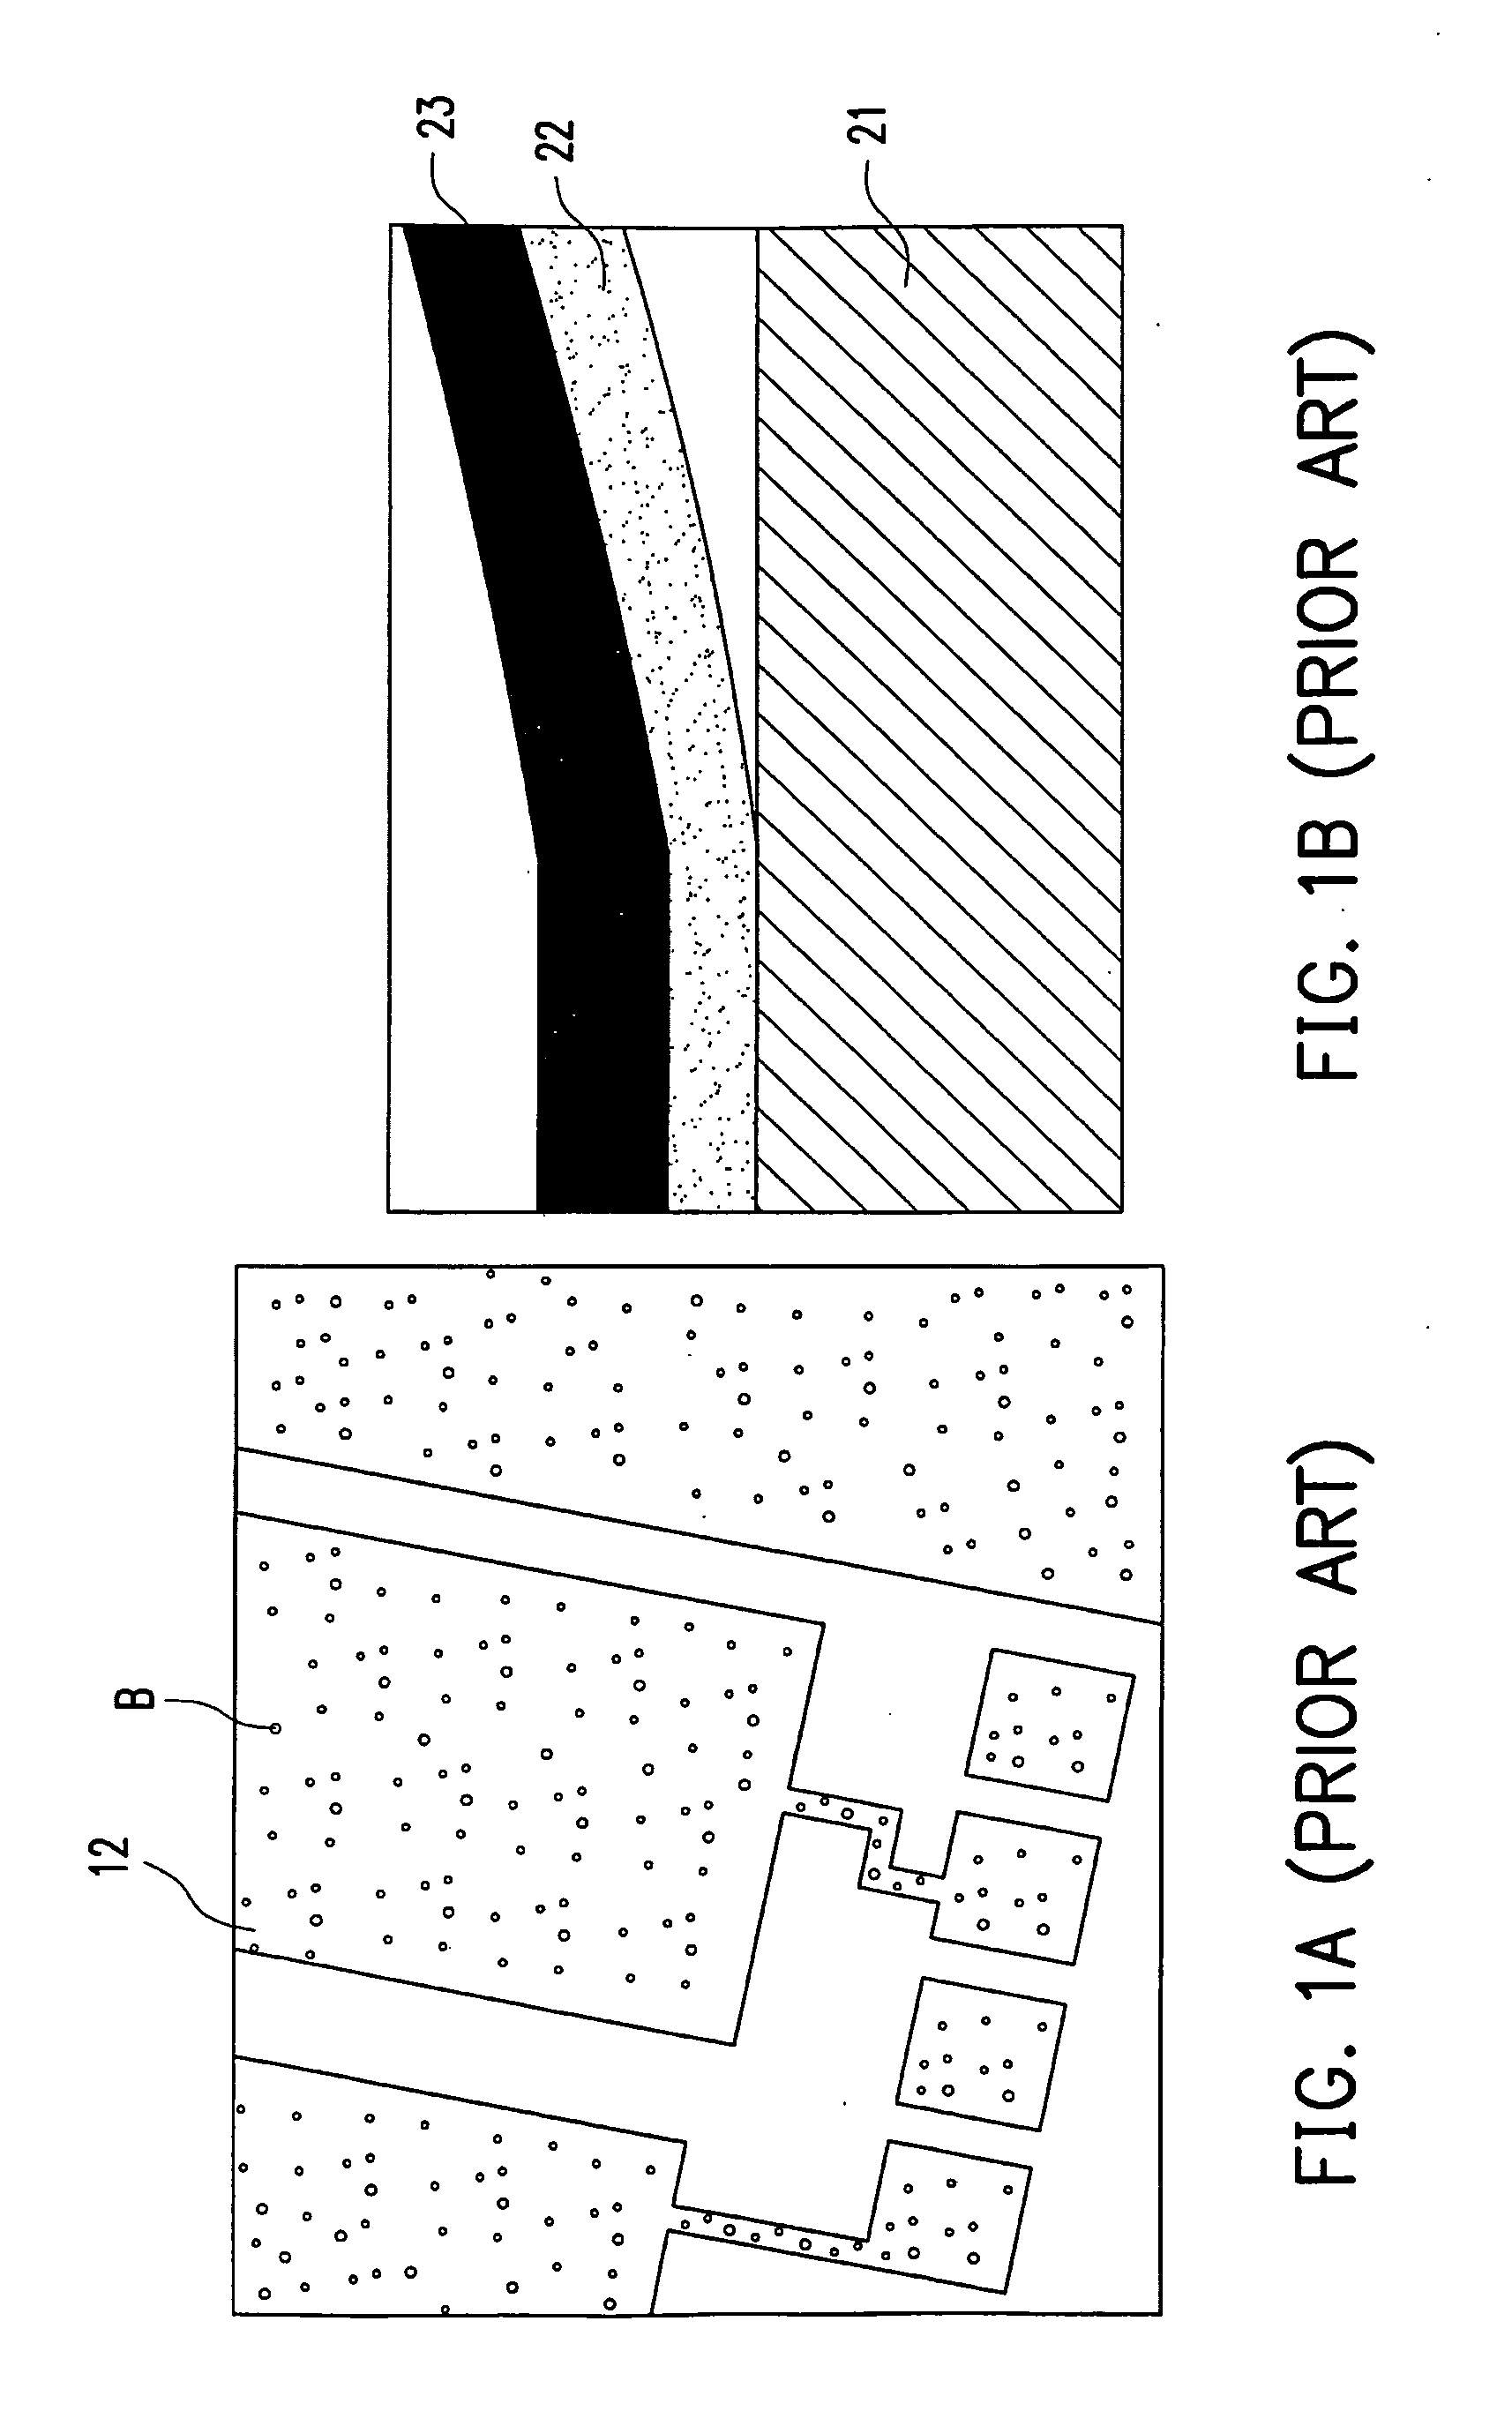 Pixel structure, display panel, eletro-optical apparatus, and method thererof